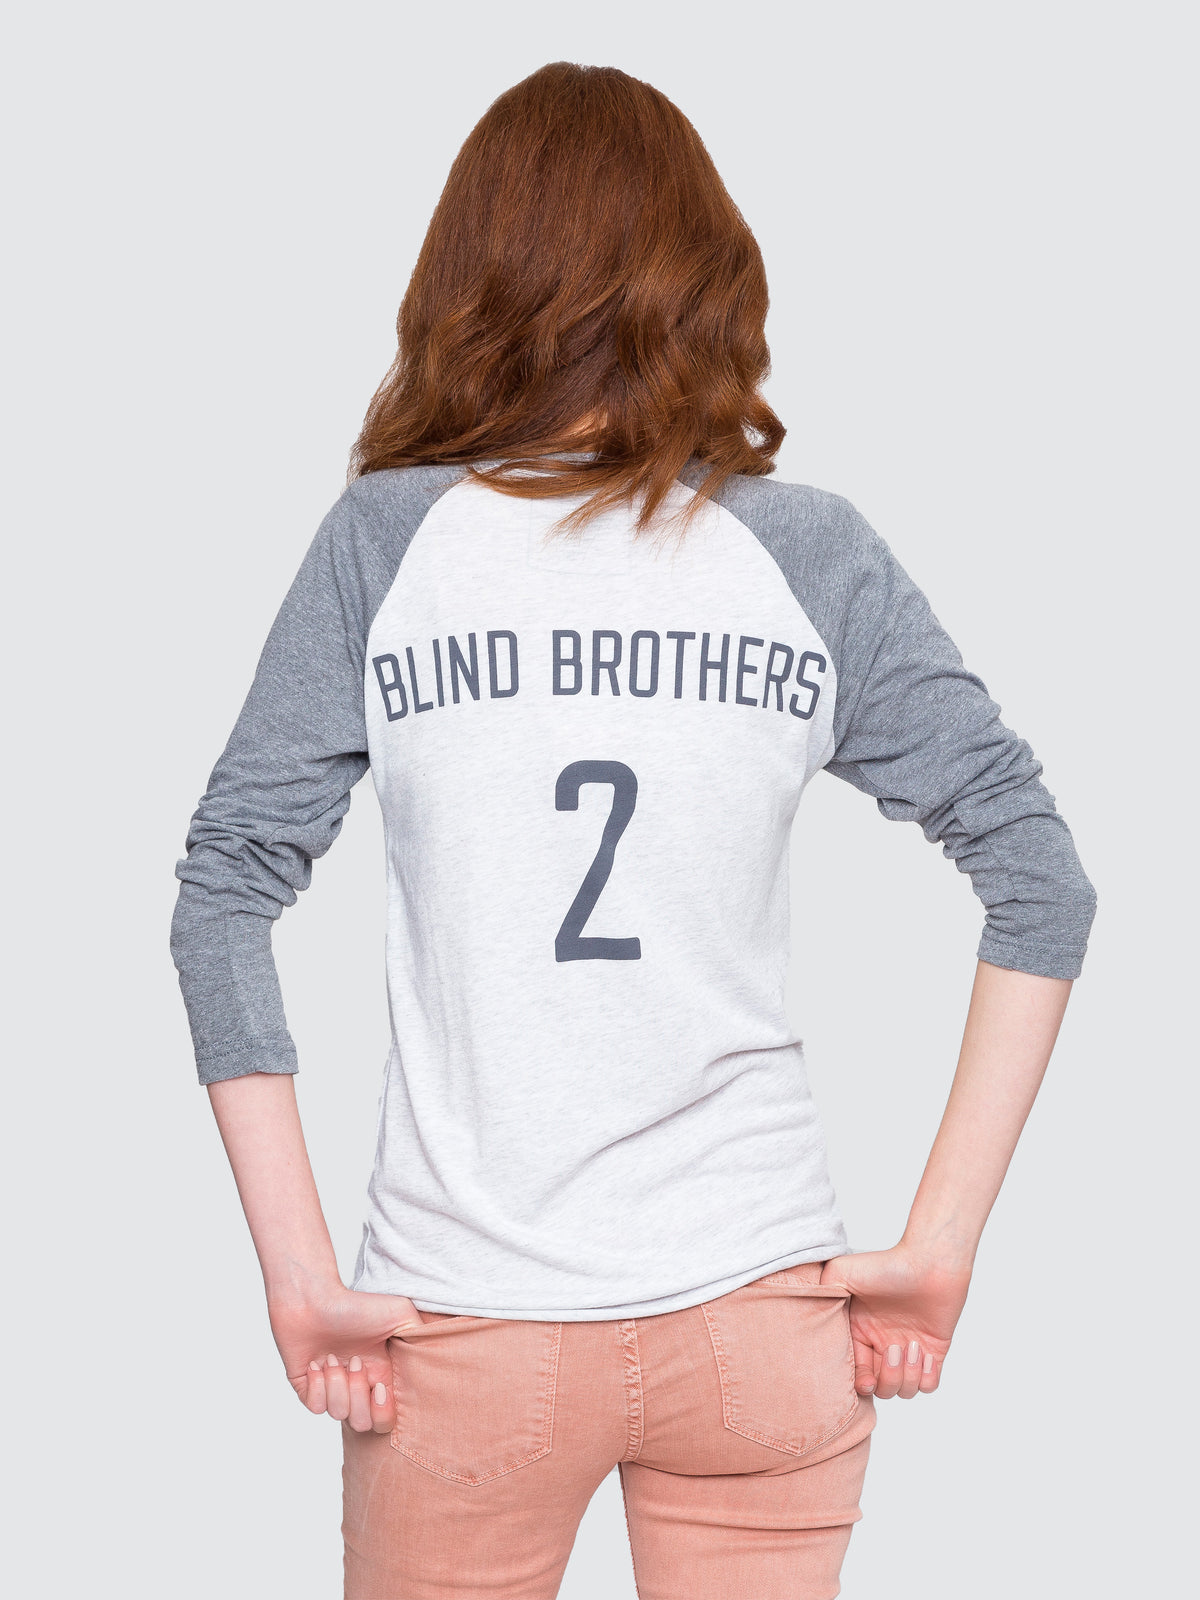 Two Blind Brothers - Womens Team 2BB Baseball Graphic Raglan Team-2BB-Graphic-Baseball-Tee